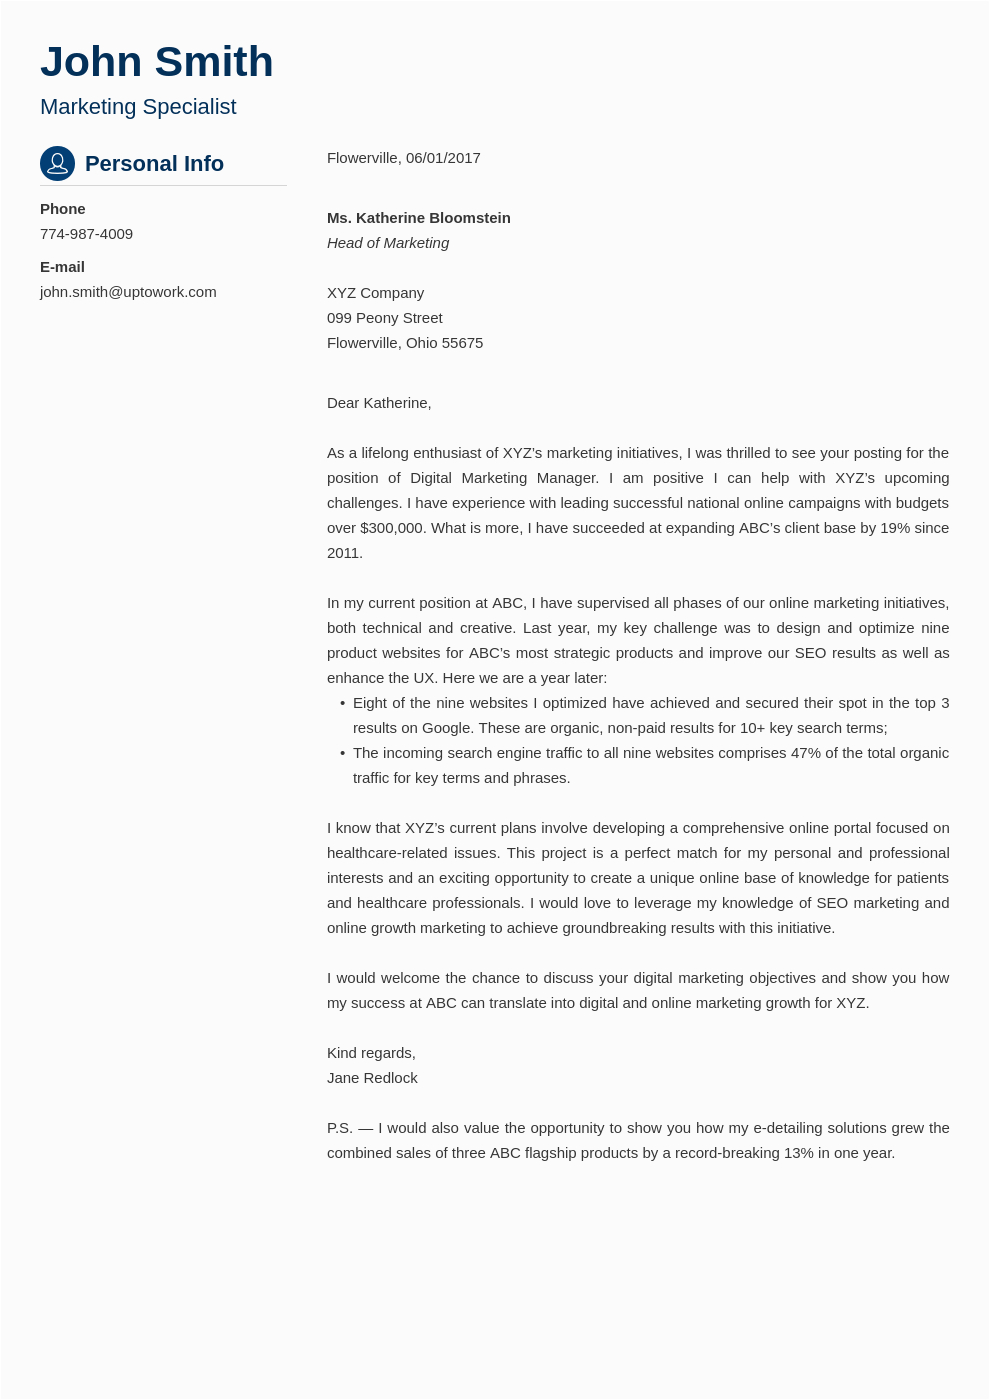 Resume and Cover Letter Template Download 18 Cover Letter Templates for Any Job Application